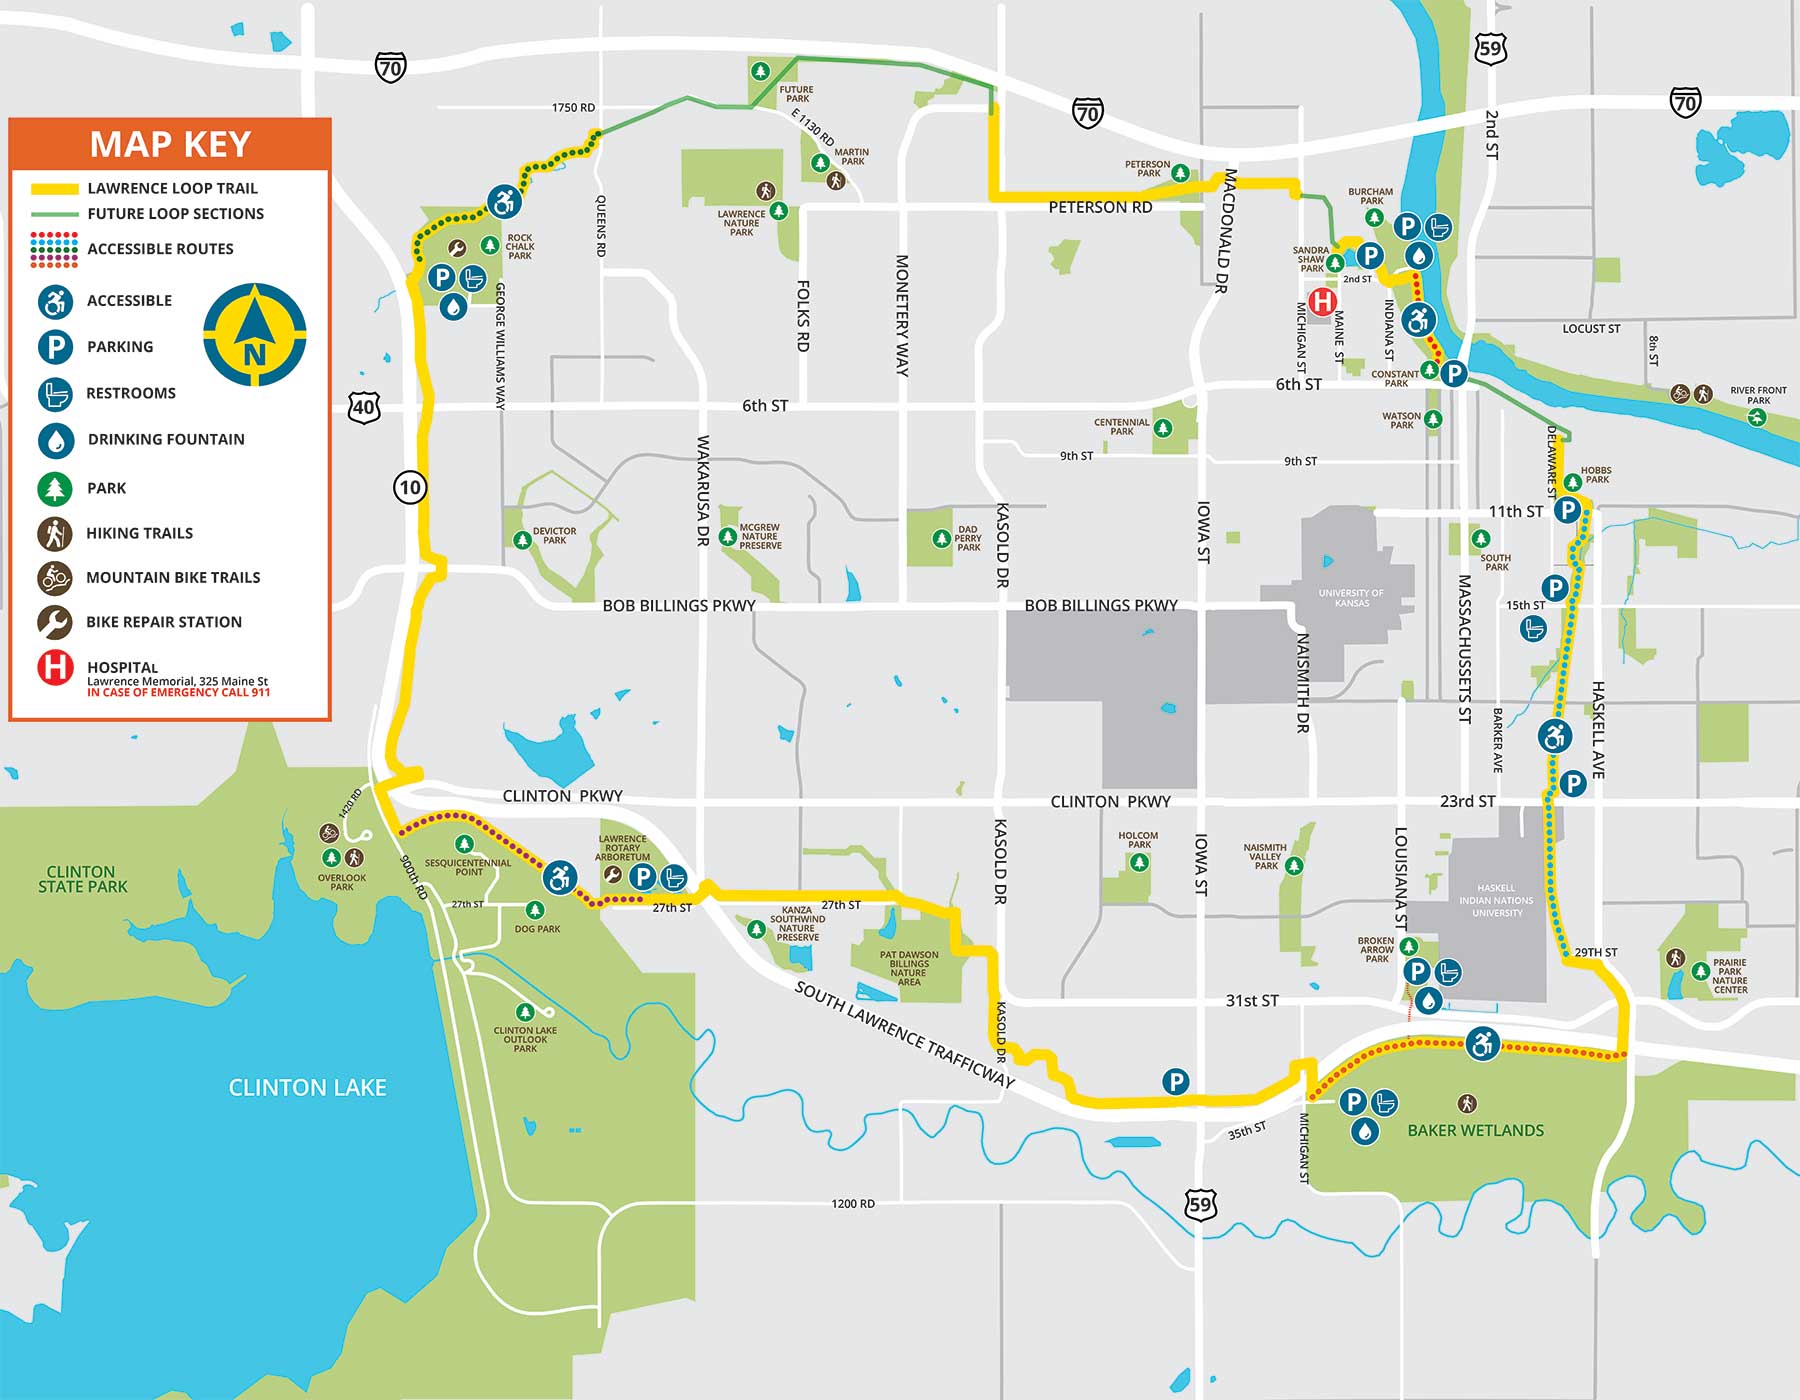 Lawrence Loop Accessible Routes